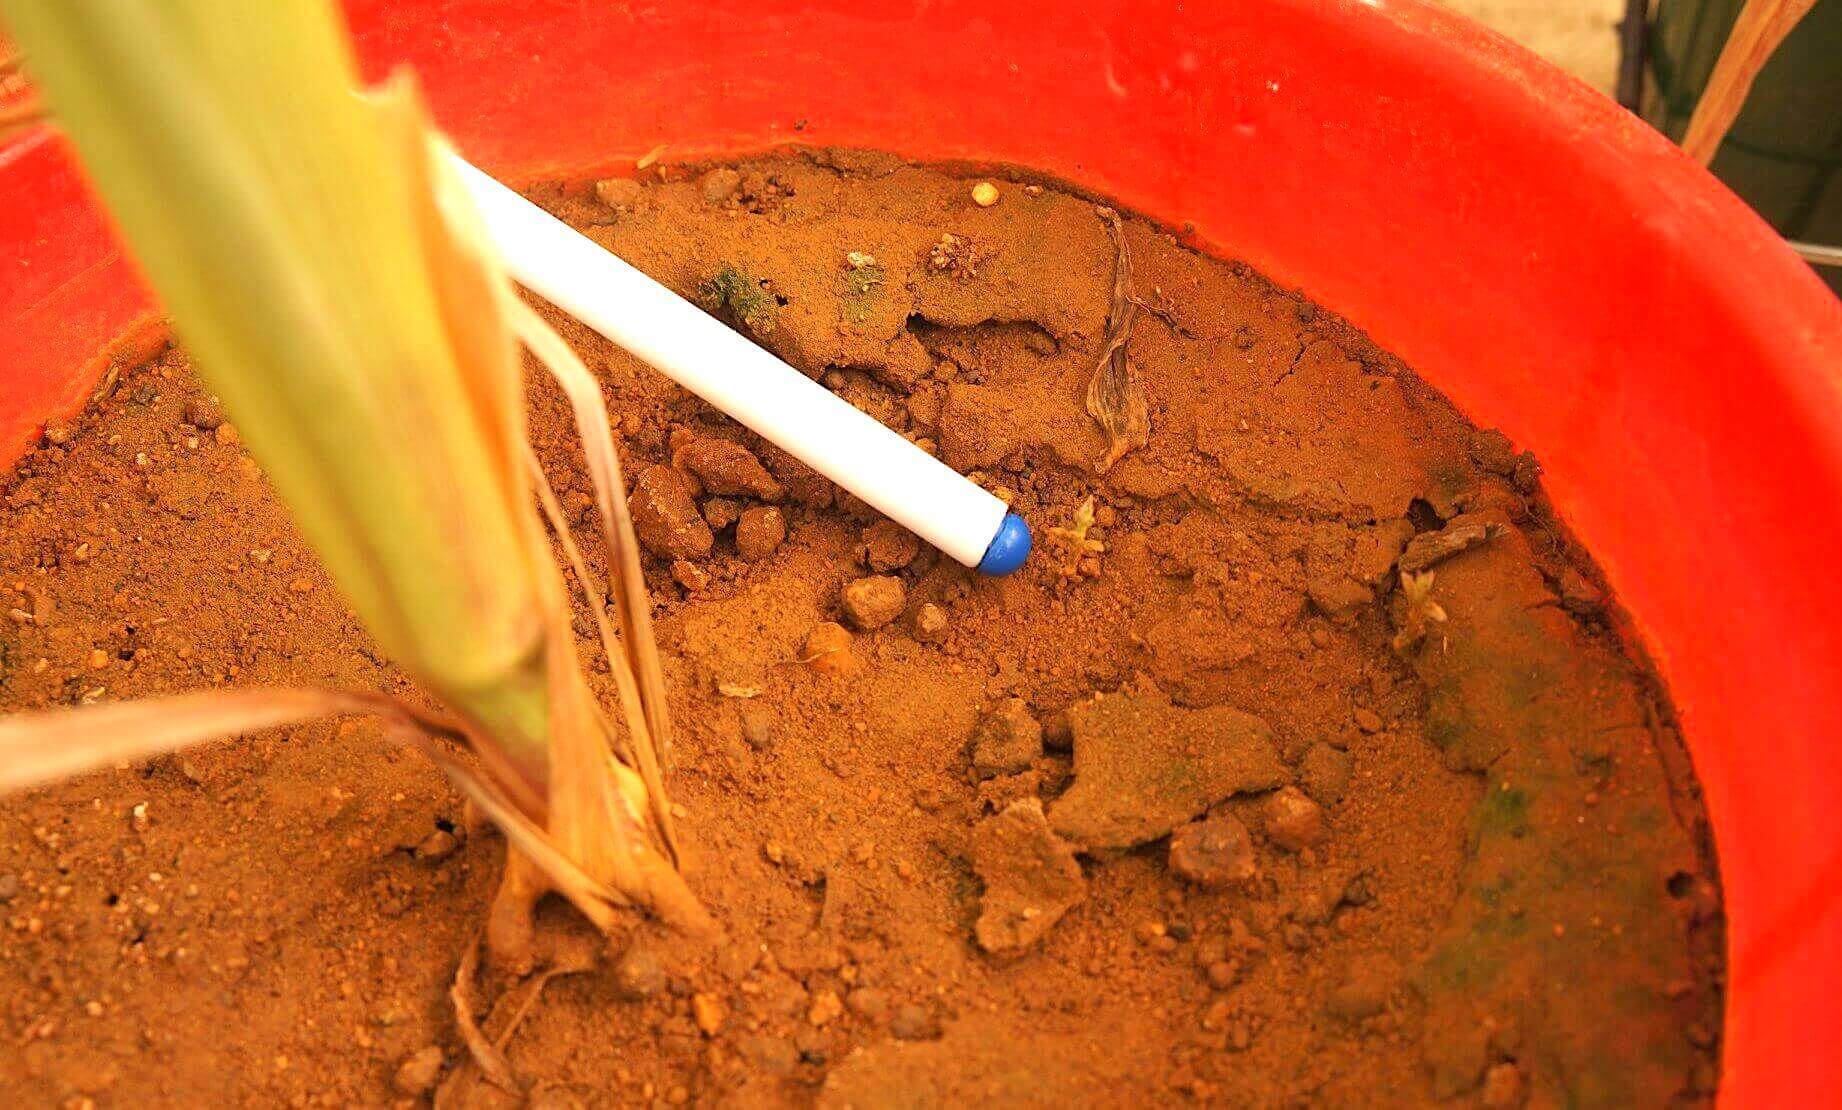 Mixed Methods research: Striga asiatica emergence in a pot sown with a susceptible host (Zea mays).